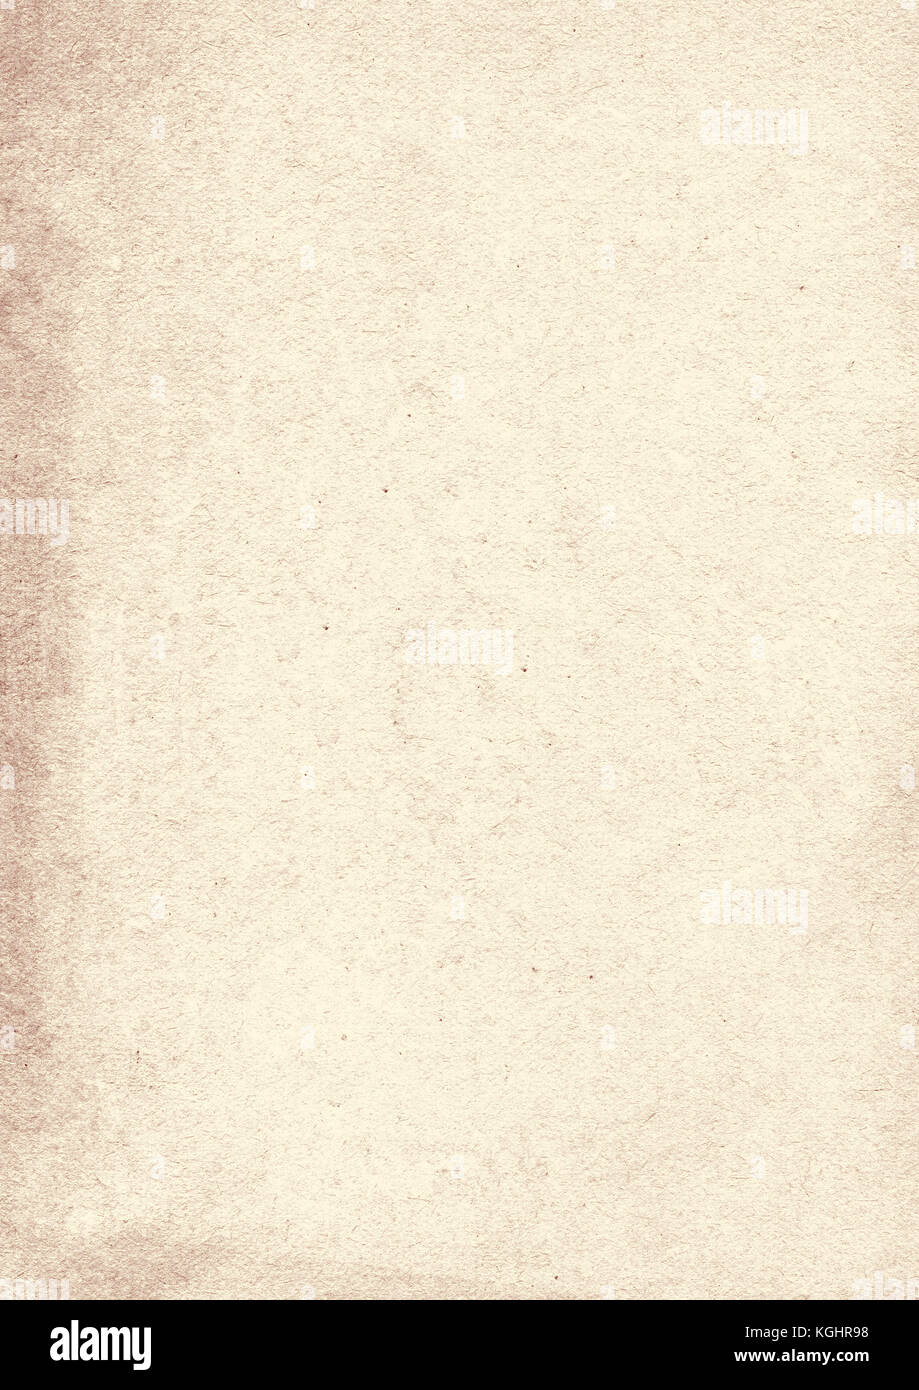 The blank vertical beige grunge old classic texture paper sheet background Stock Photo